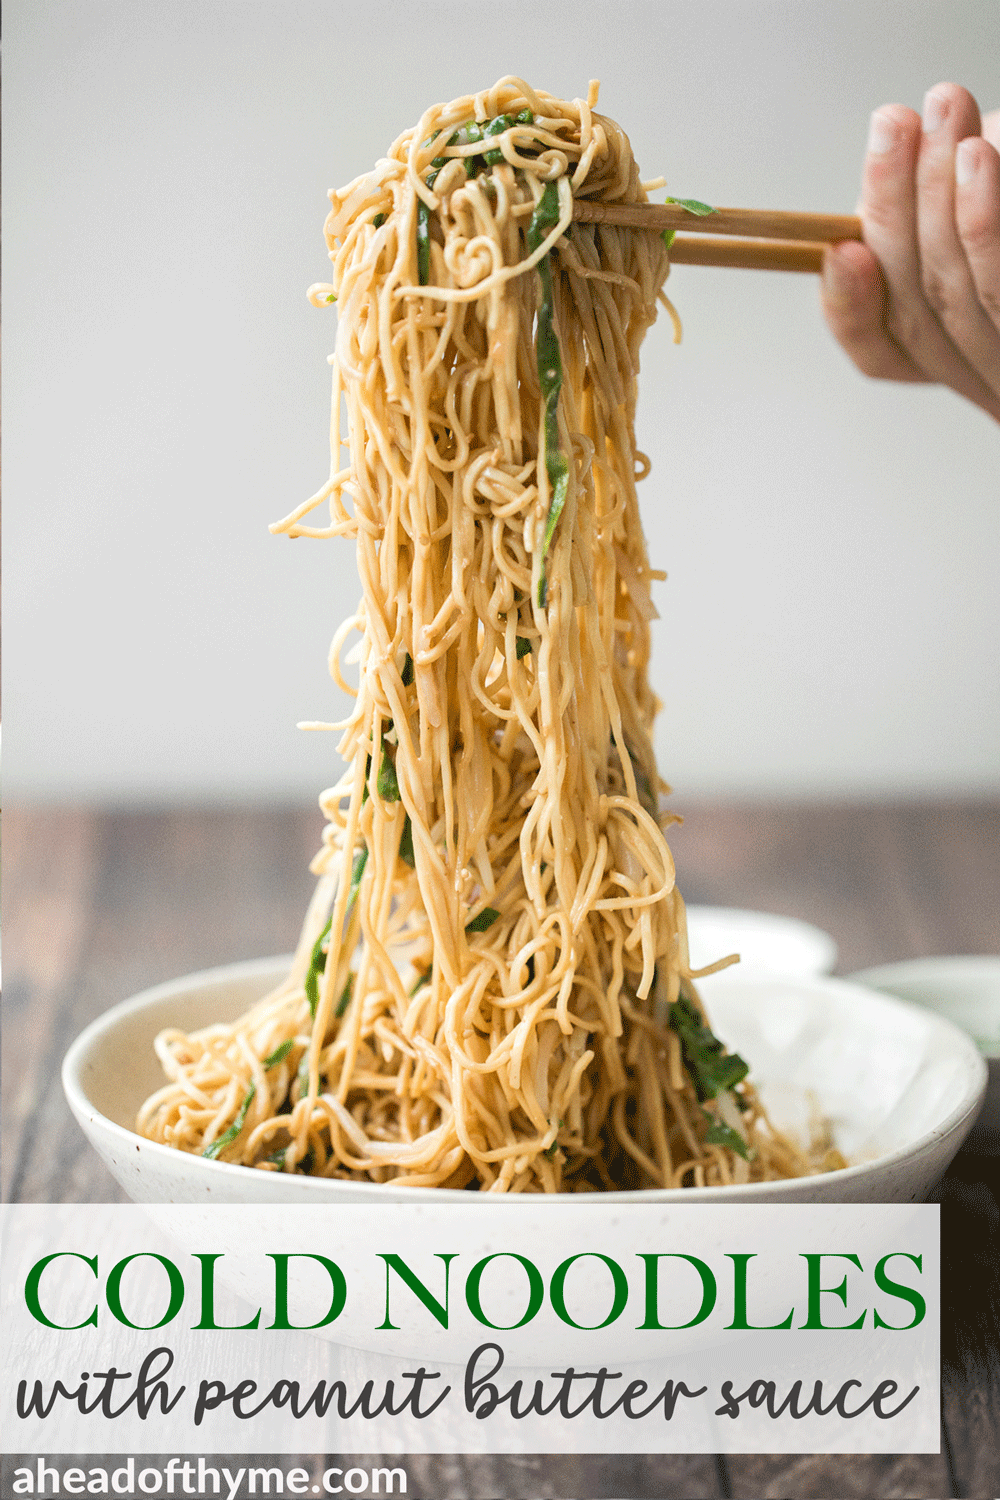 Cold Noodles with Peanut Butter Sauce